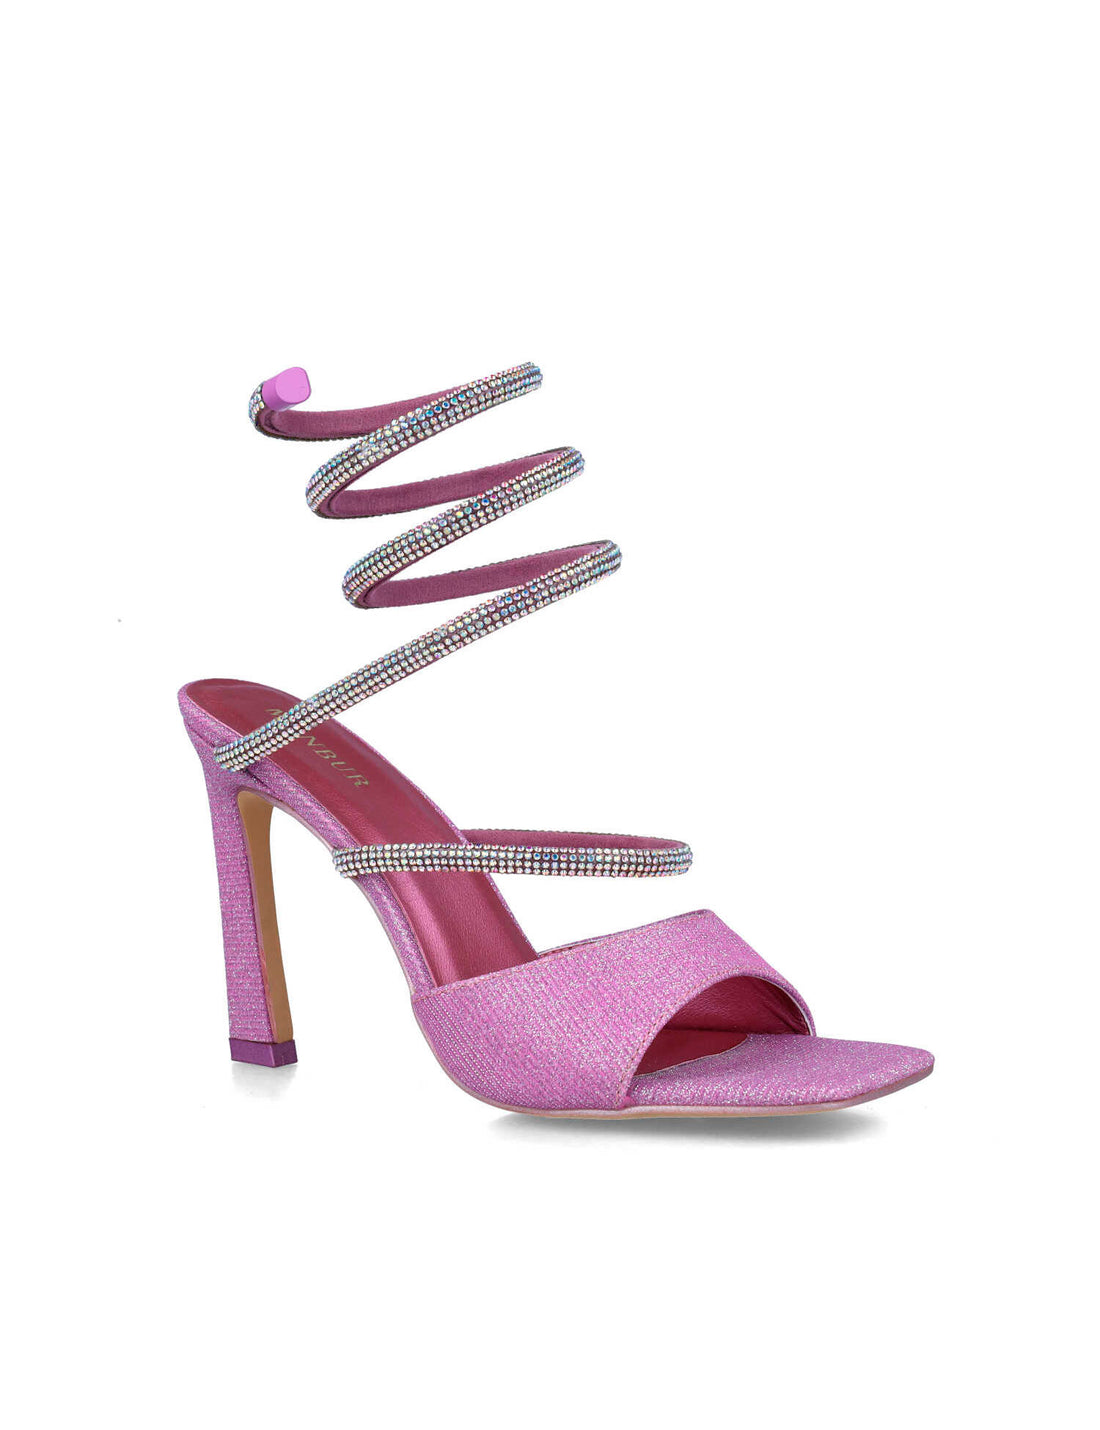 Pink Sandals With Embellished Wrap Strap_24712_03_02